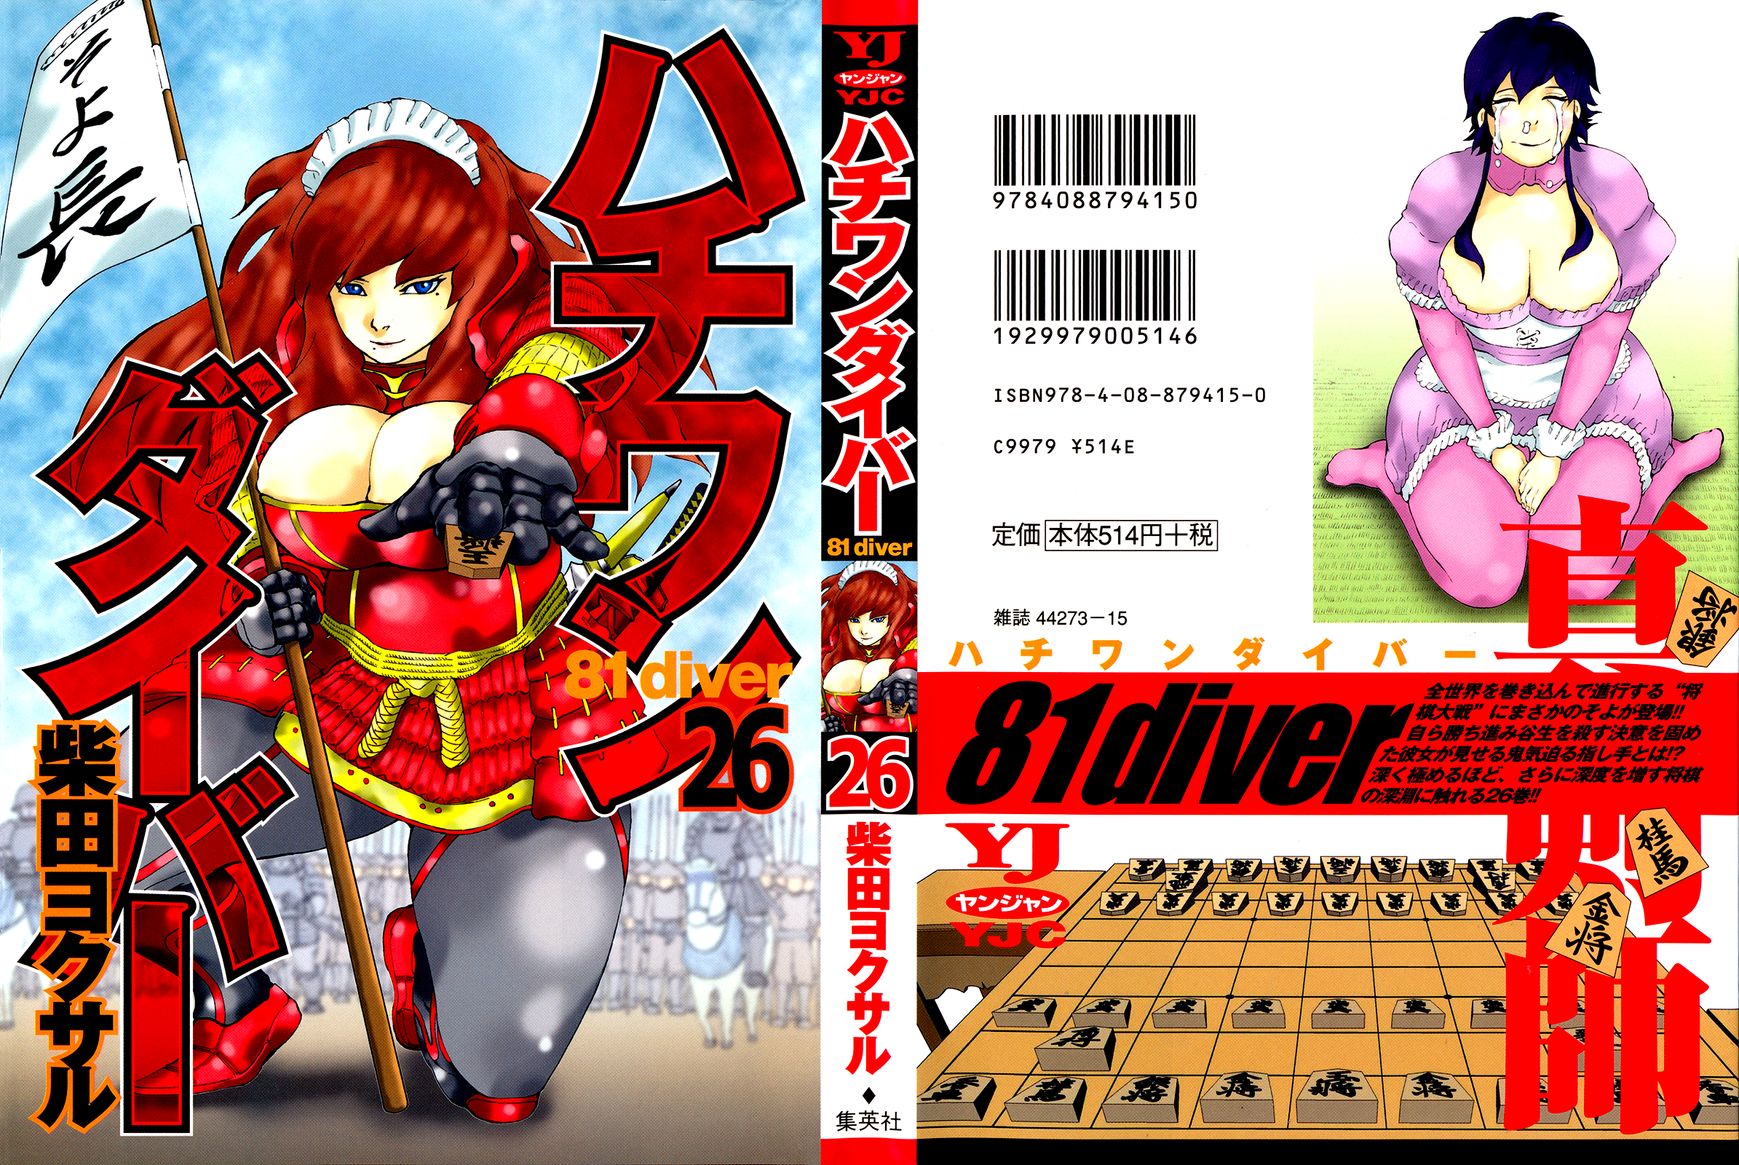 81 Diver Chapter 266 #1